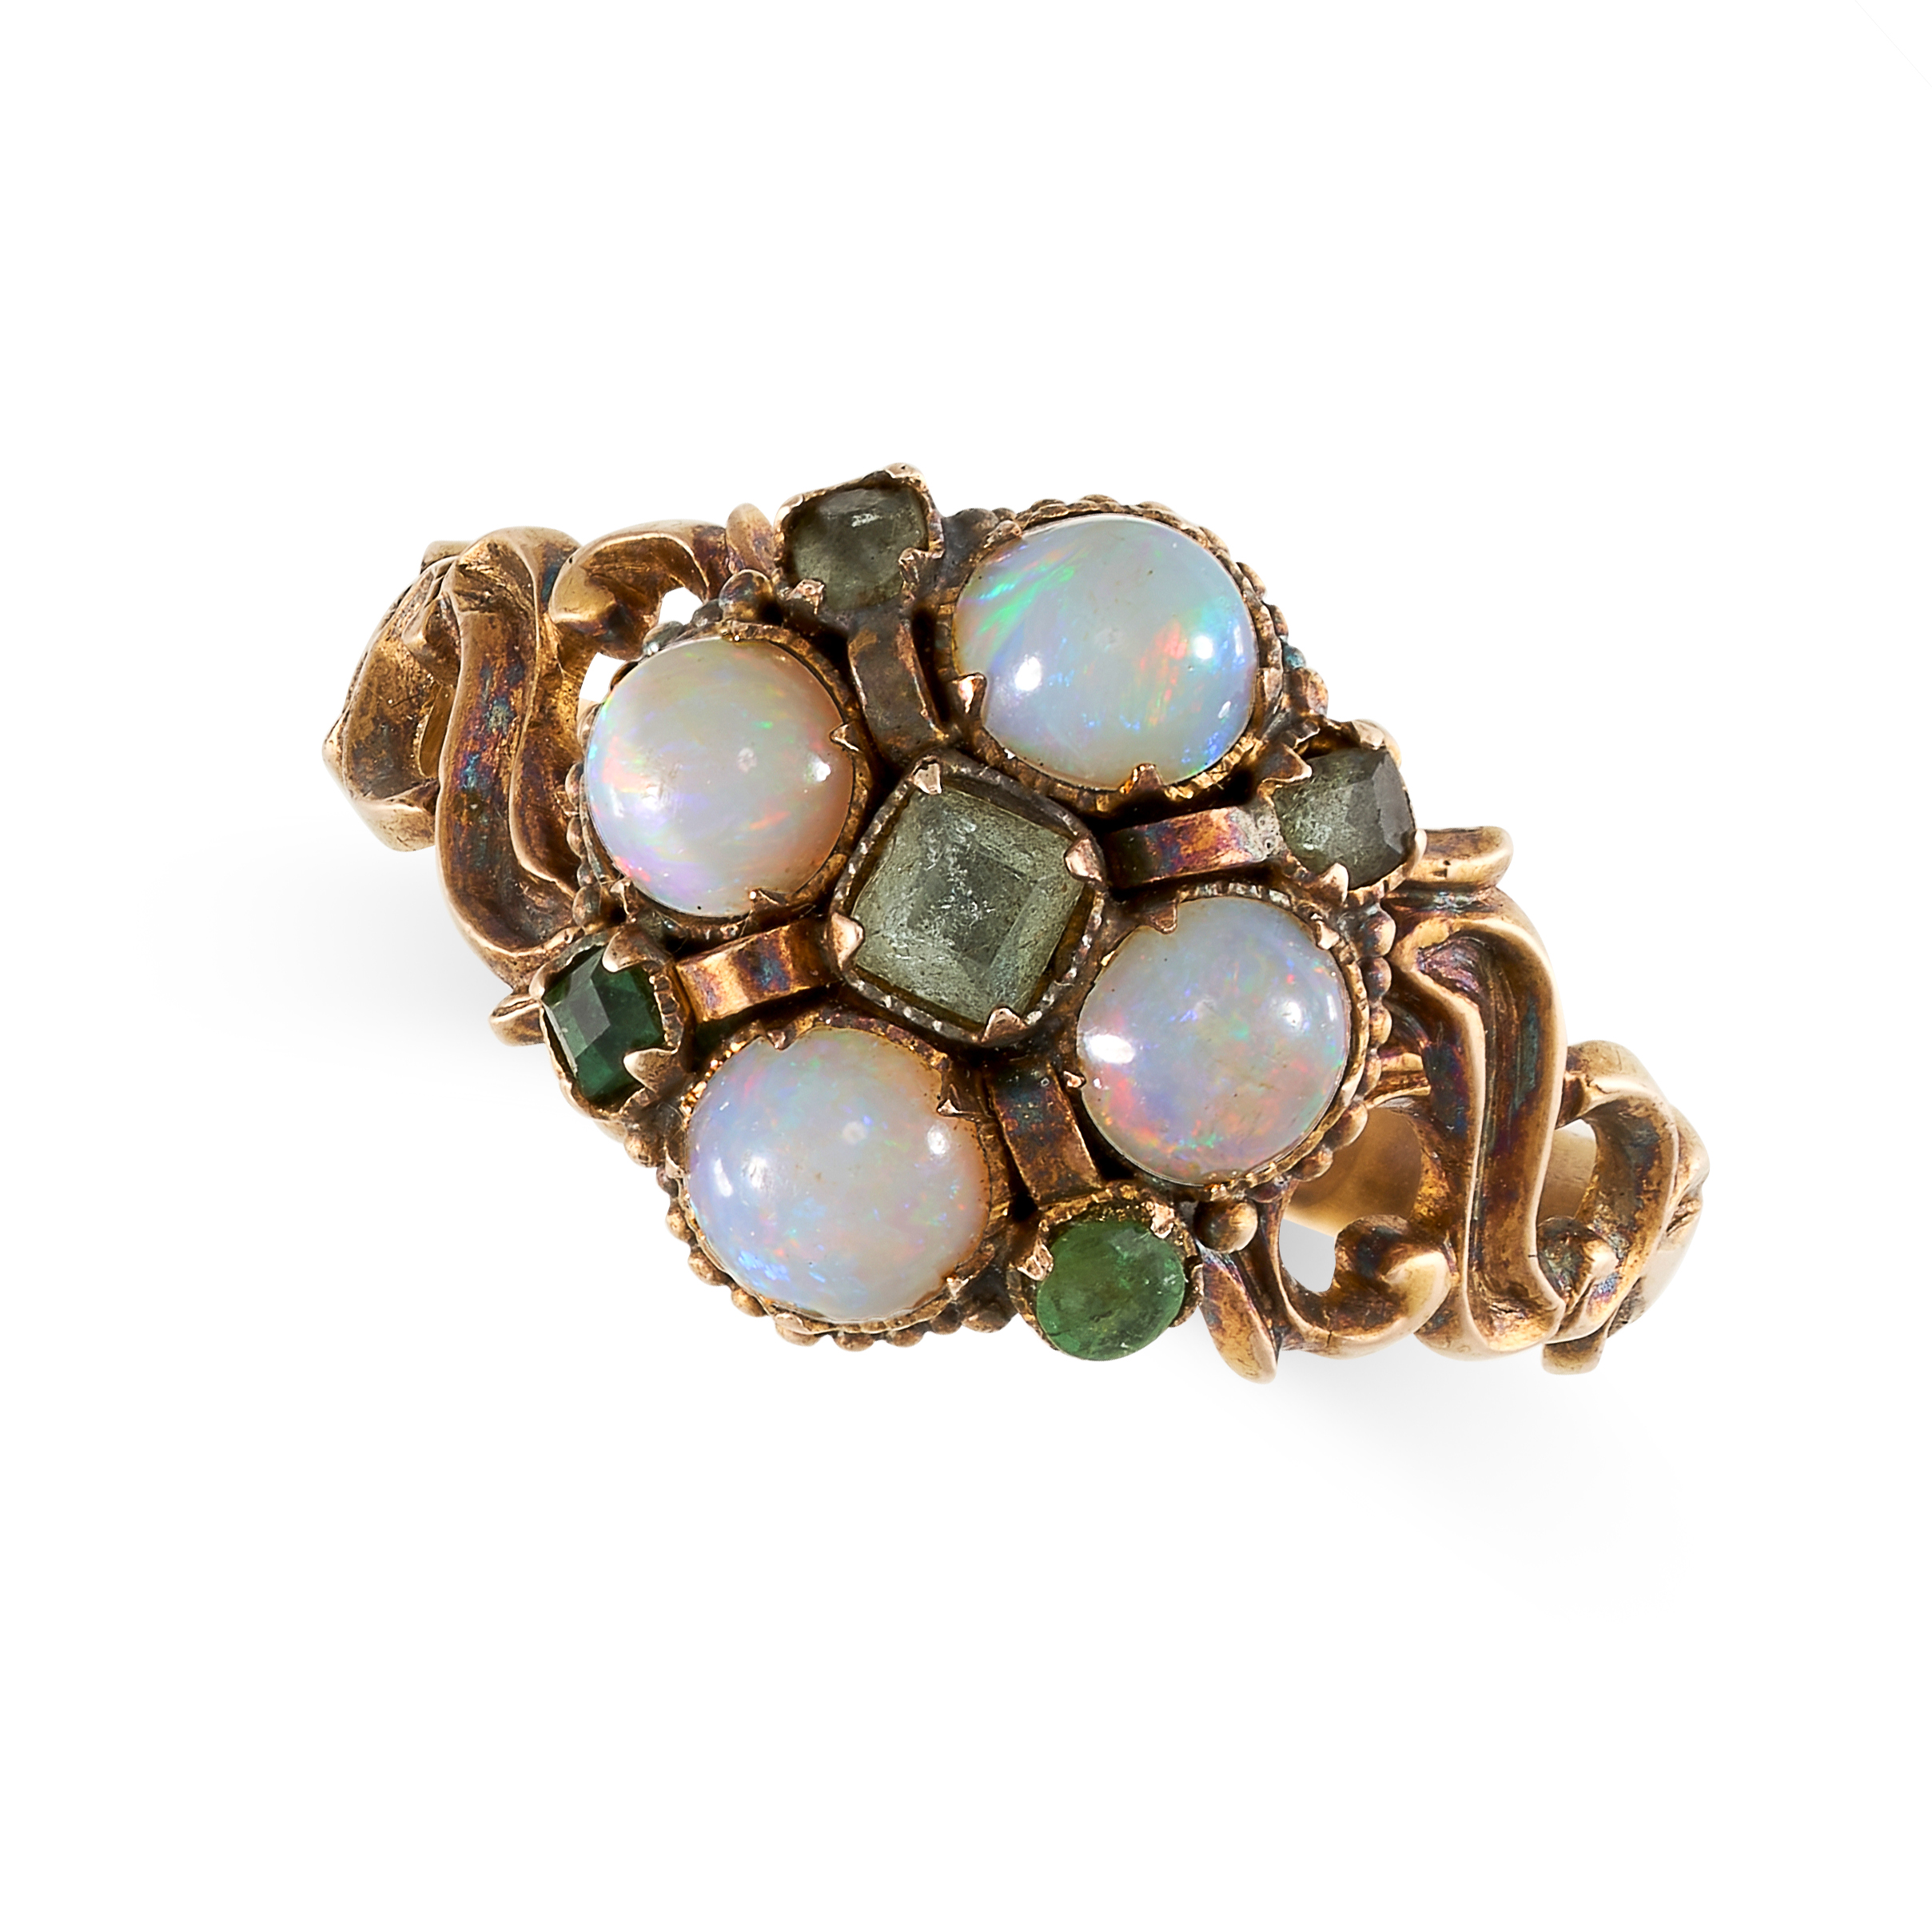 NO RESERVE - AN ANTIQUE VICTORIAN OPAL AND EMERALD RING, 1869 in 15ct yellow gold, set with round